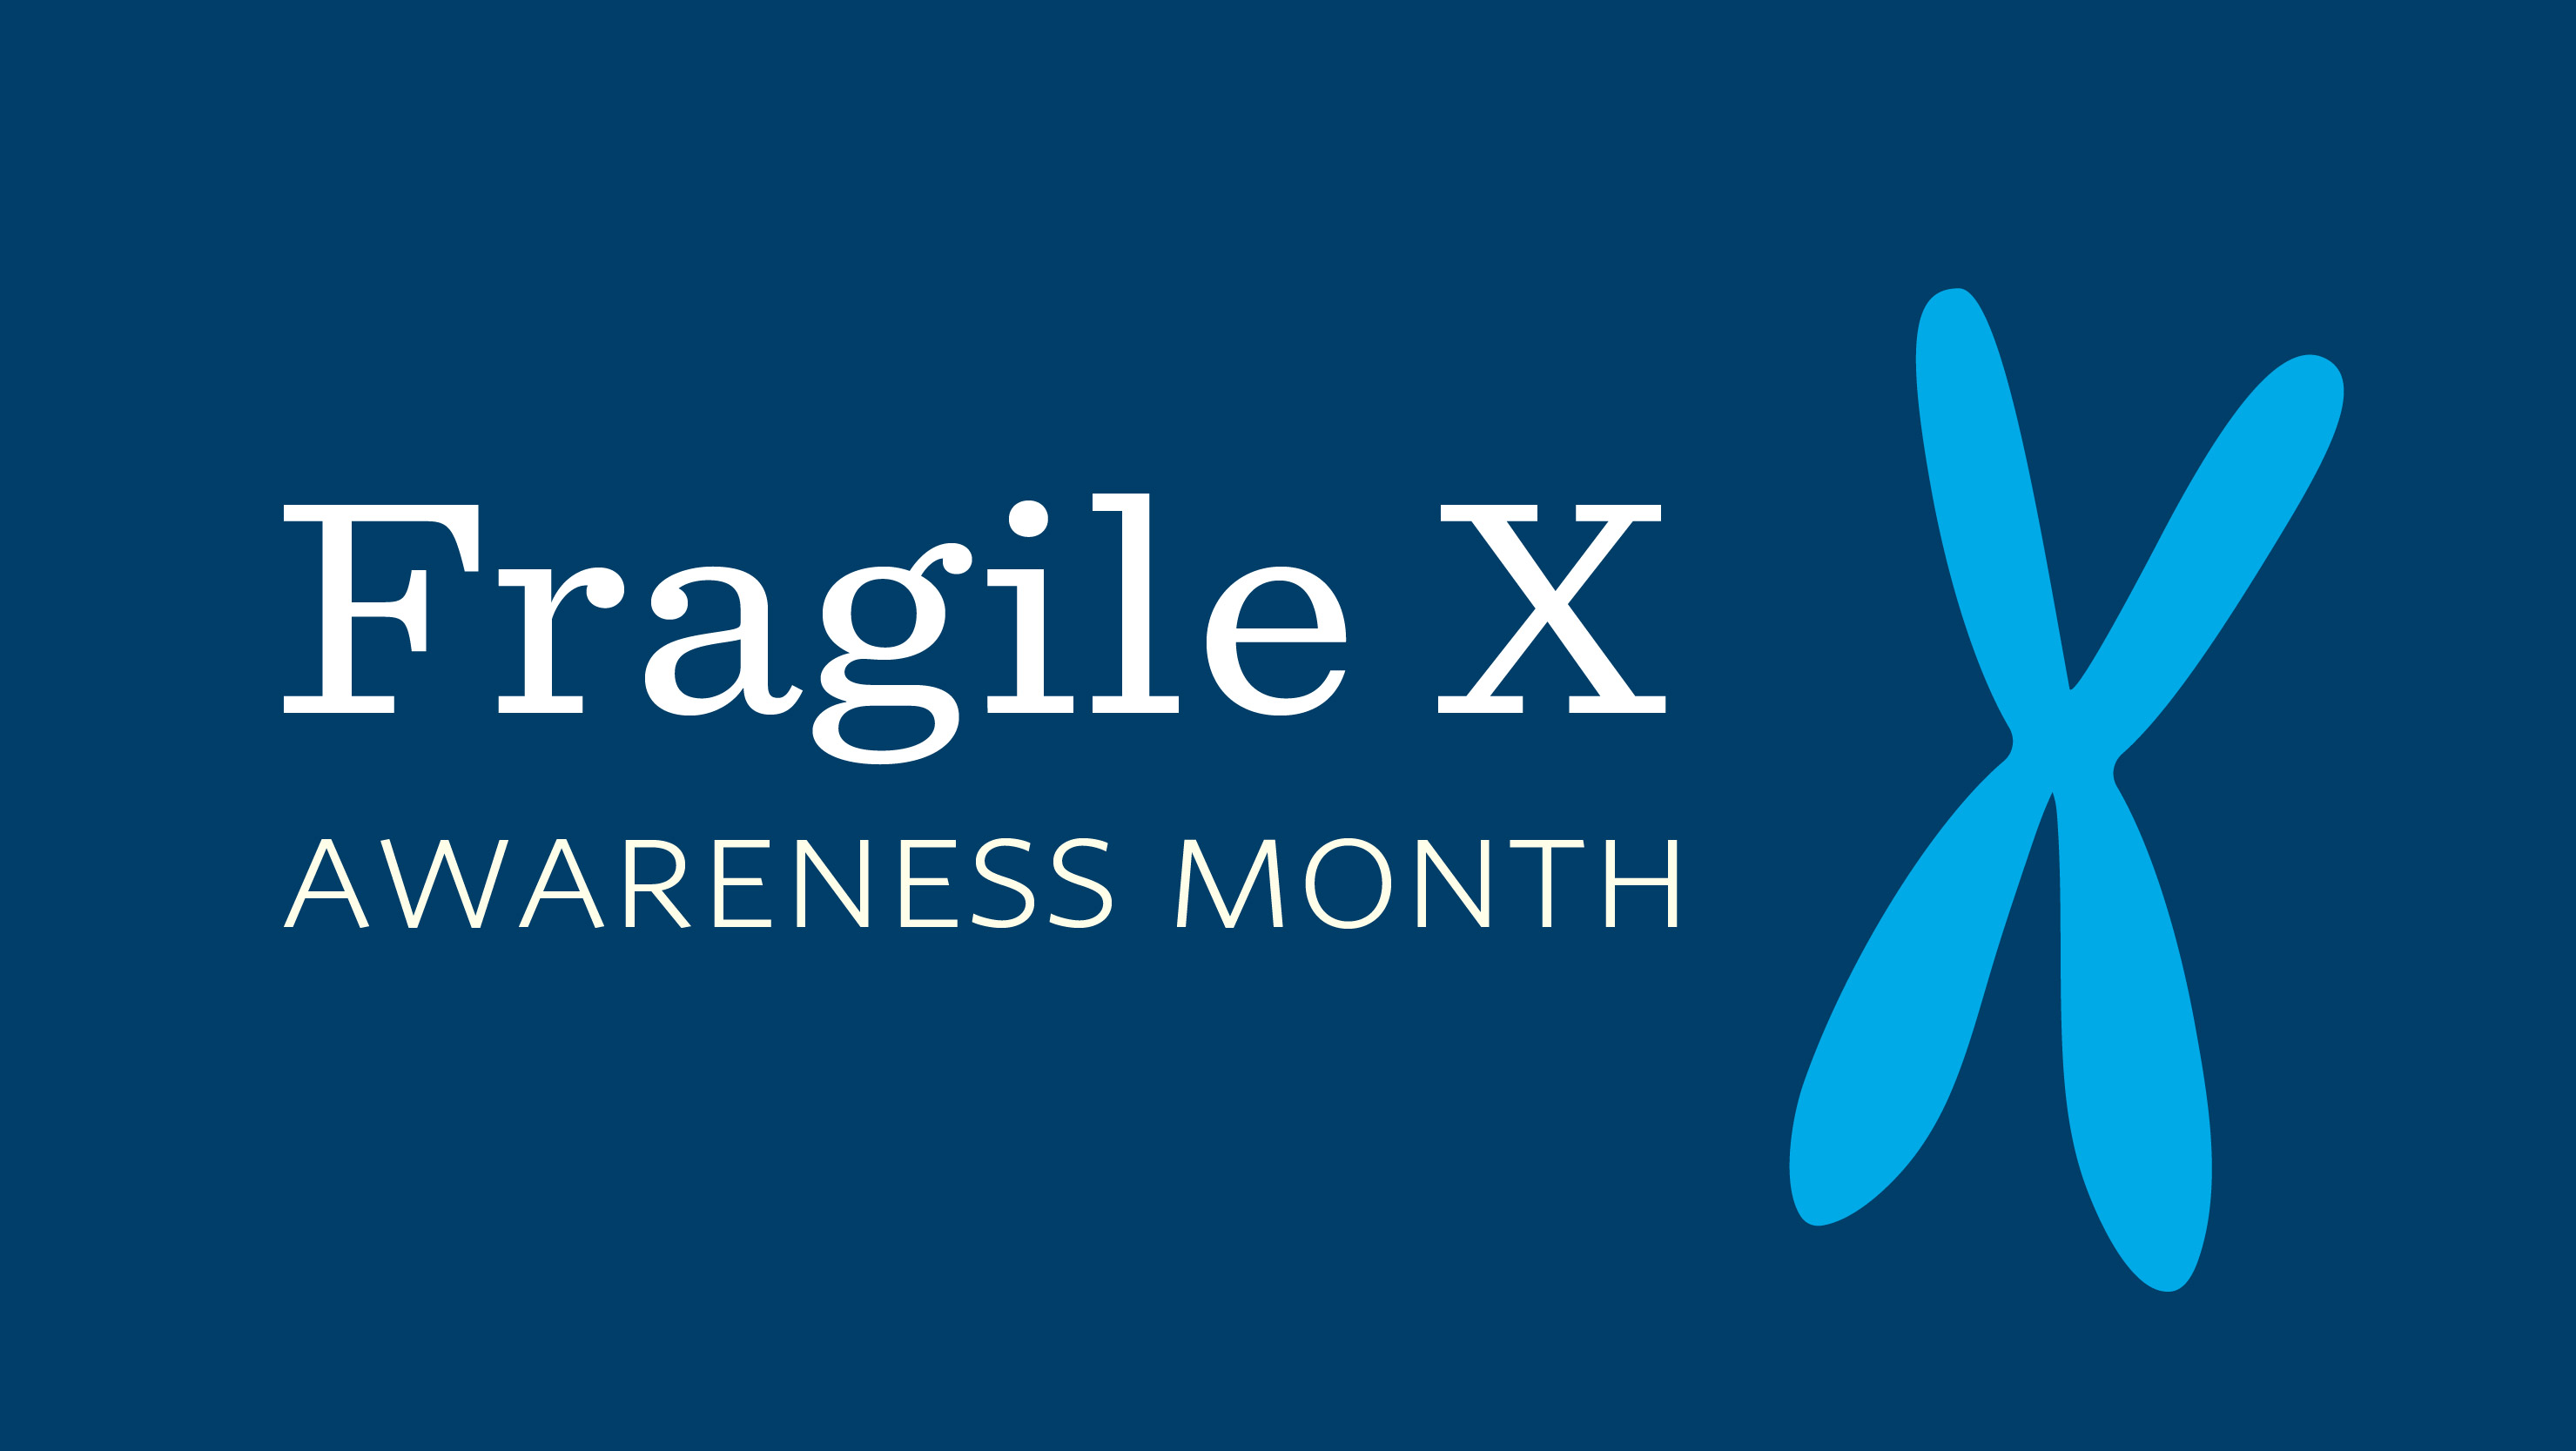 5 Benefits I Learned from Fragile X Patients and Their Families View